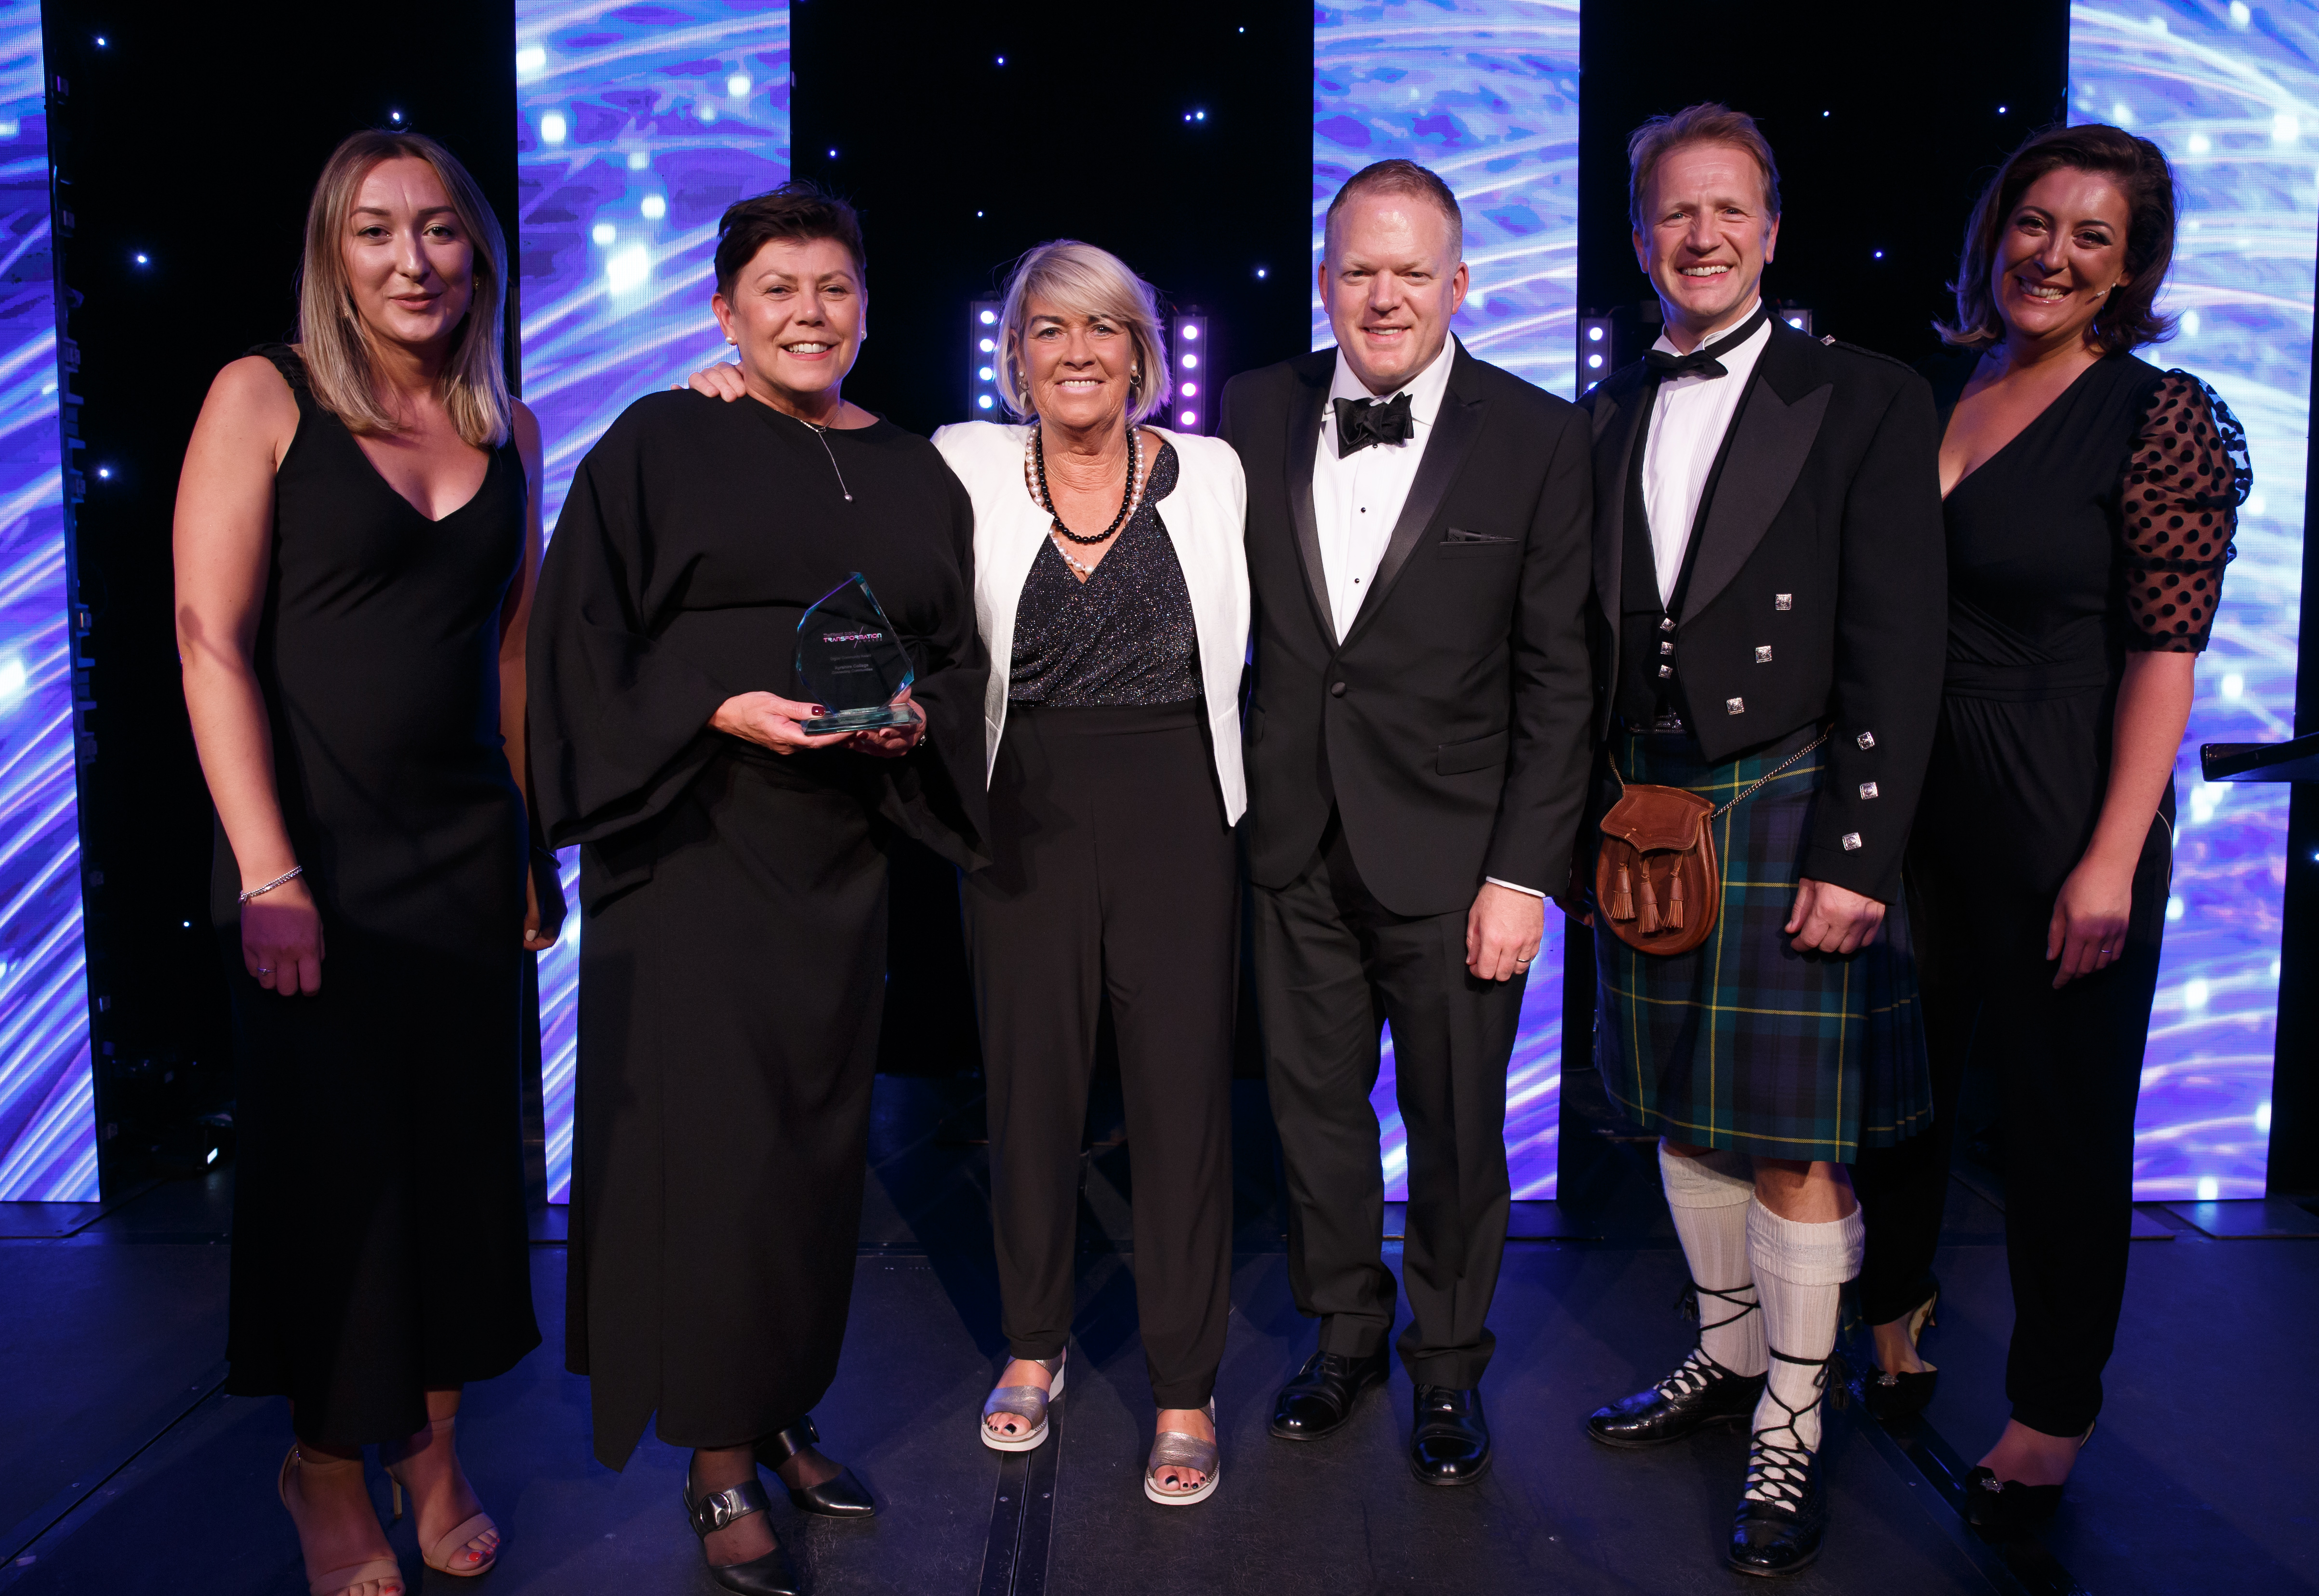 Ayrshire College recognised for Connecting Communities